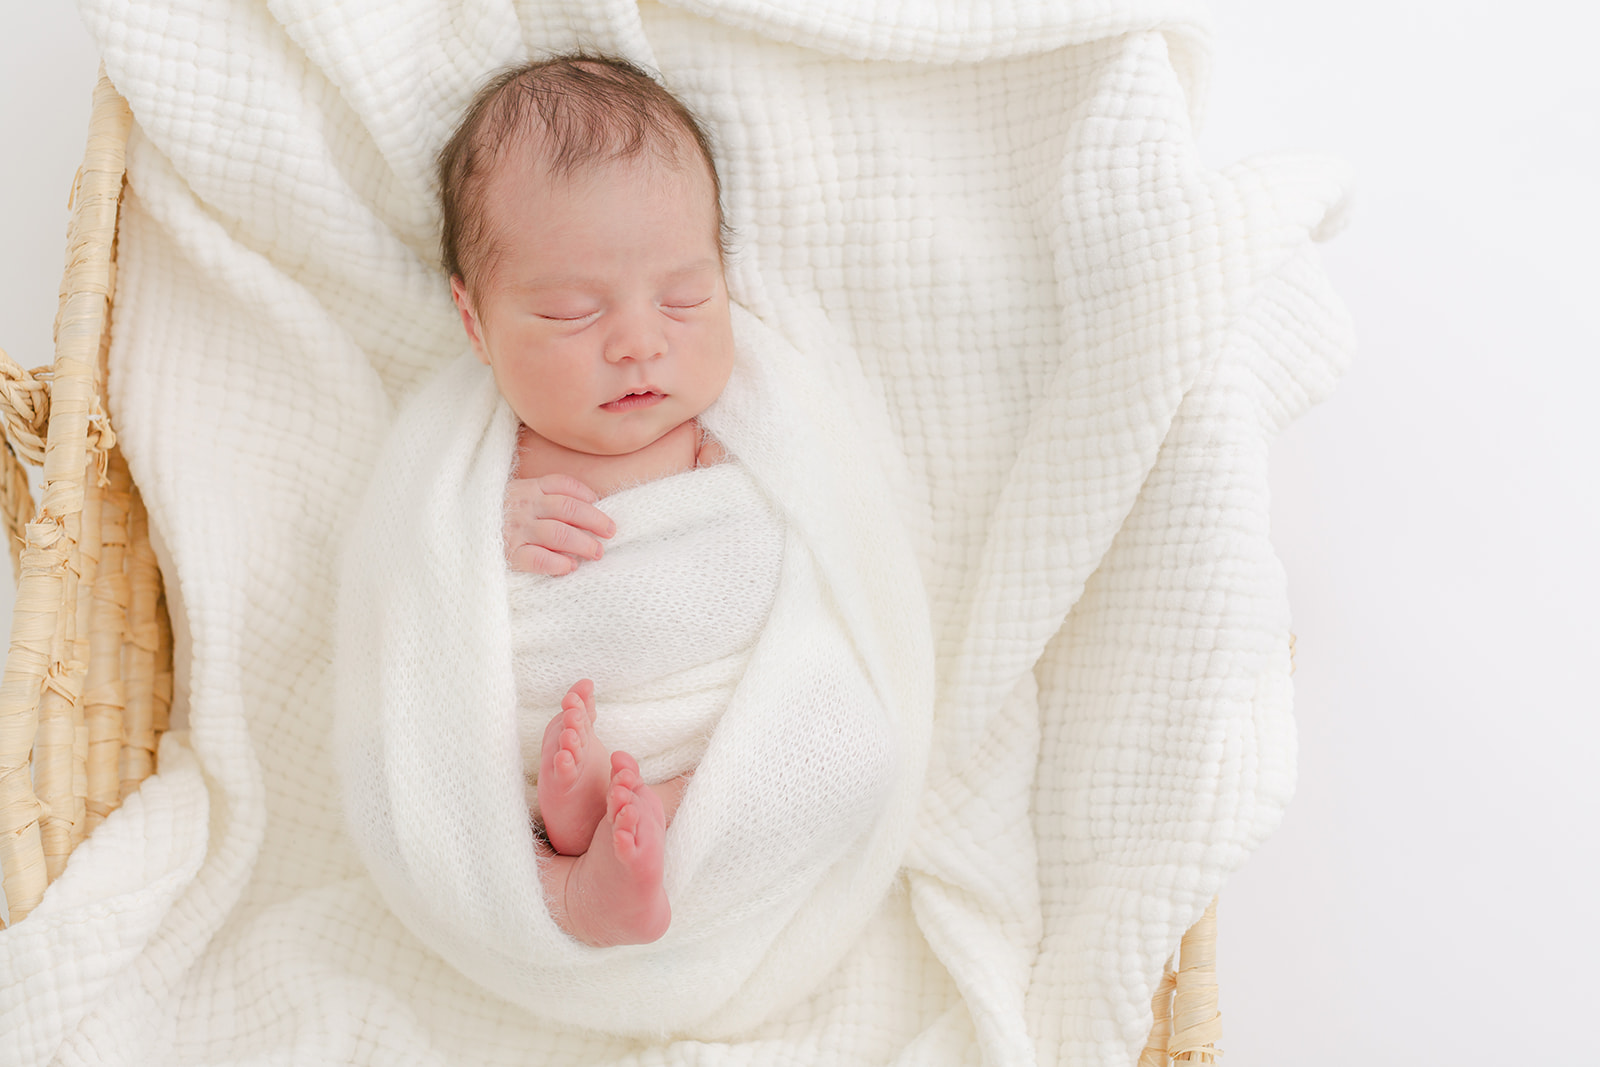 A newborn baby baby sleeps in a knit swaddle and woven basket in a studio thanks to Fertility Acupuncture Portland